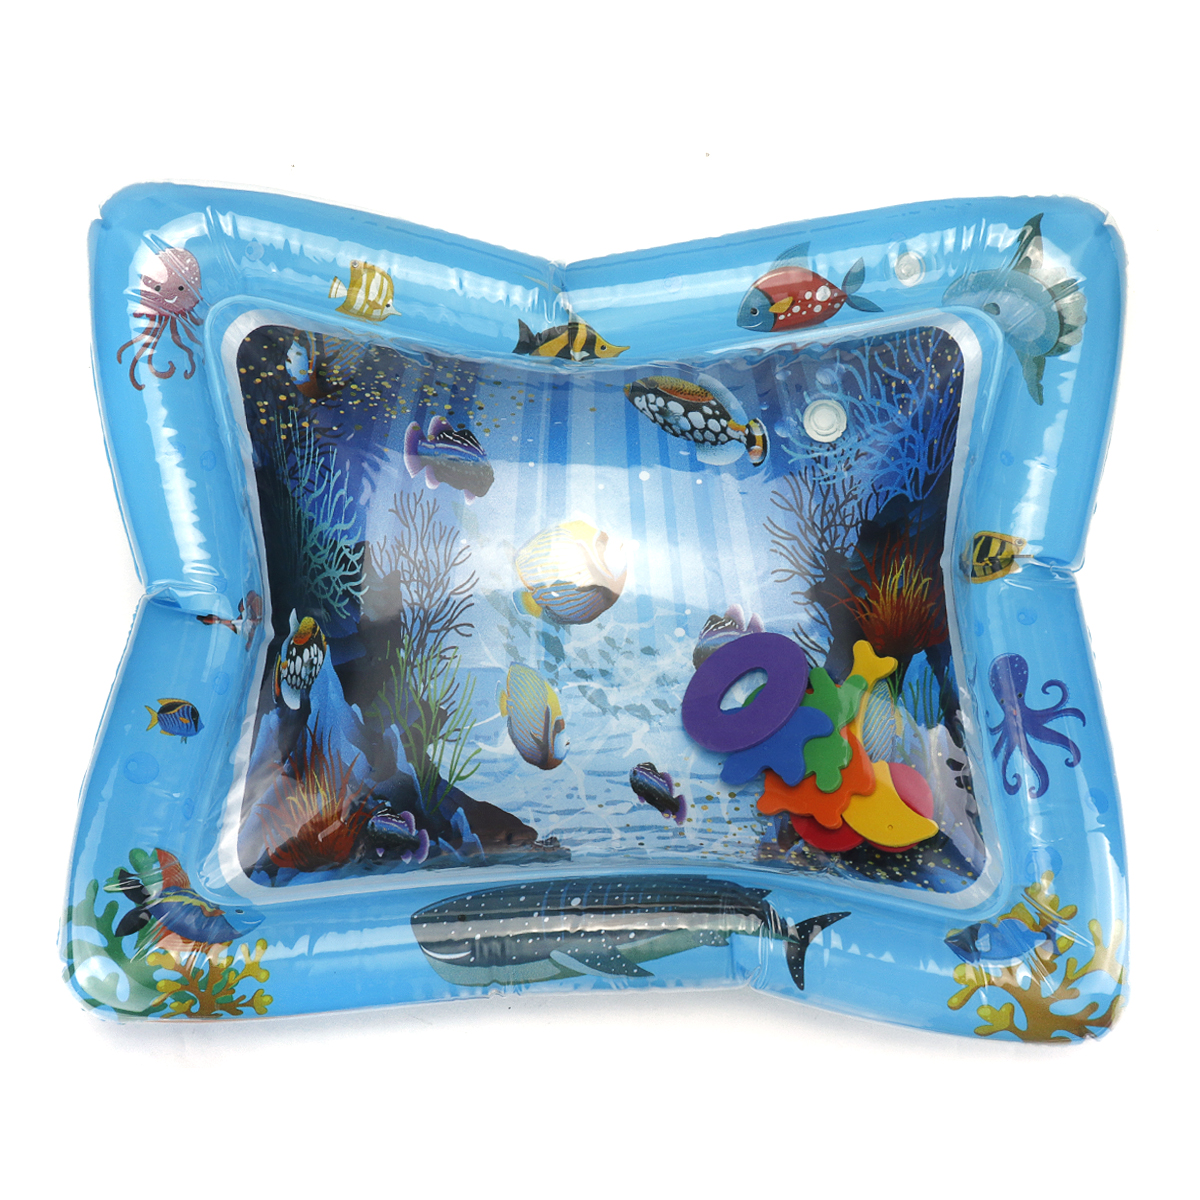 

PVC Air Inflatable Swimming Air Mattress Water Cushion Baby Kids Infant Toddlers Tummy Water Play Fun Toys Ice Mat Pad